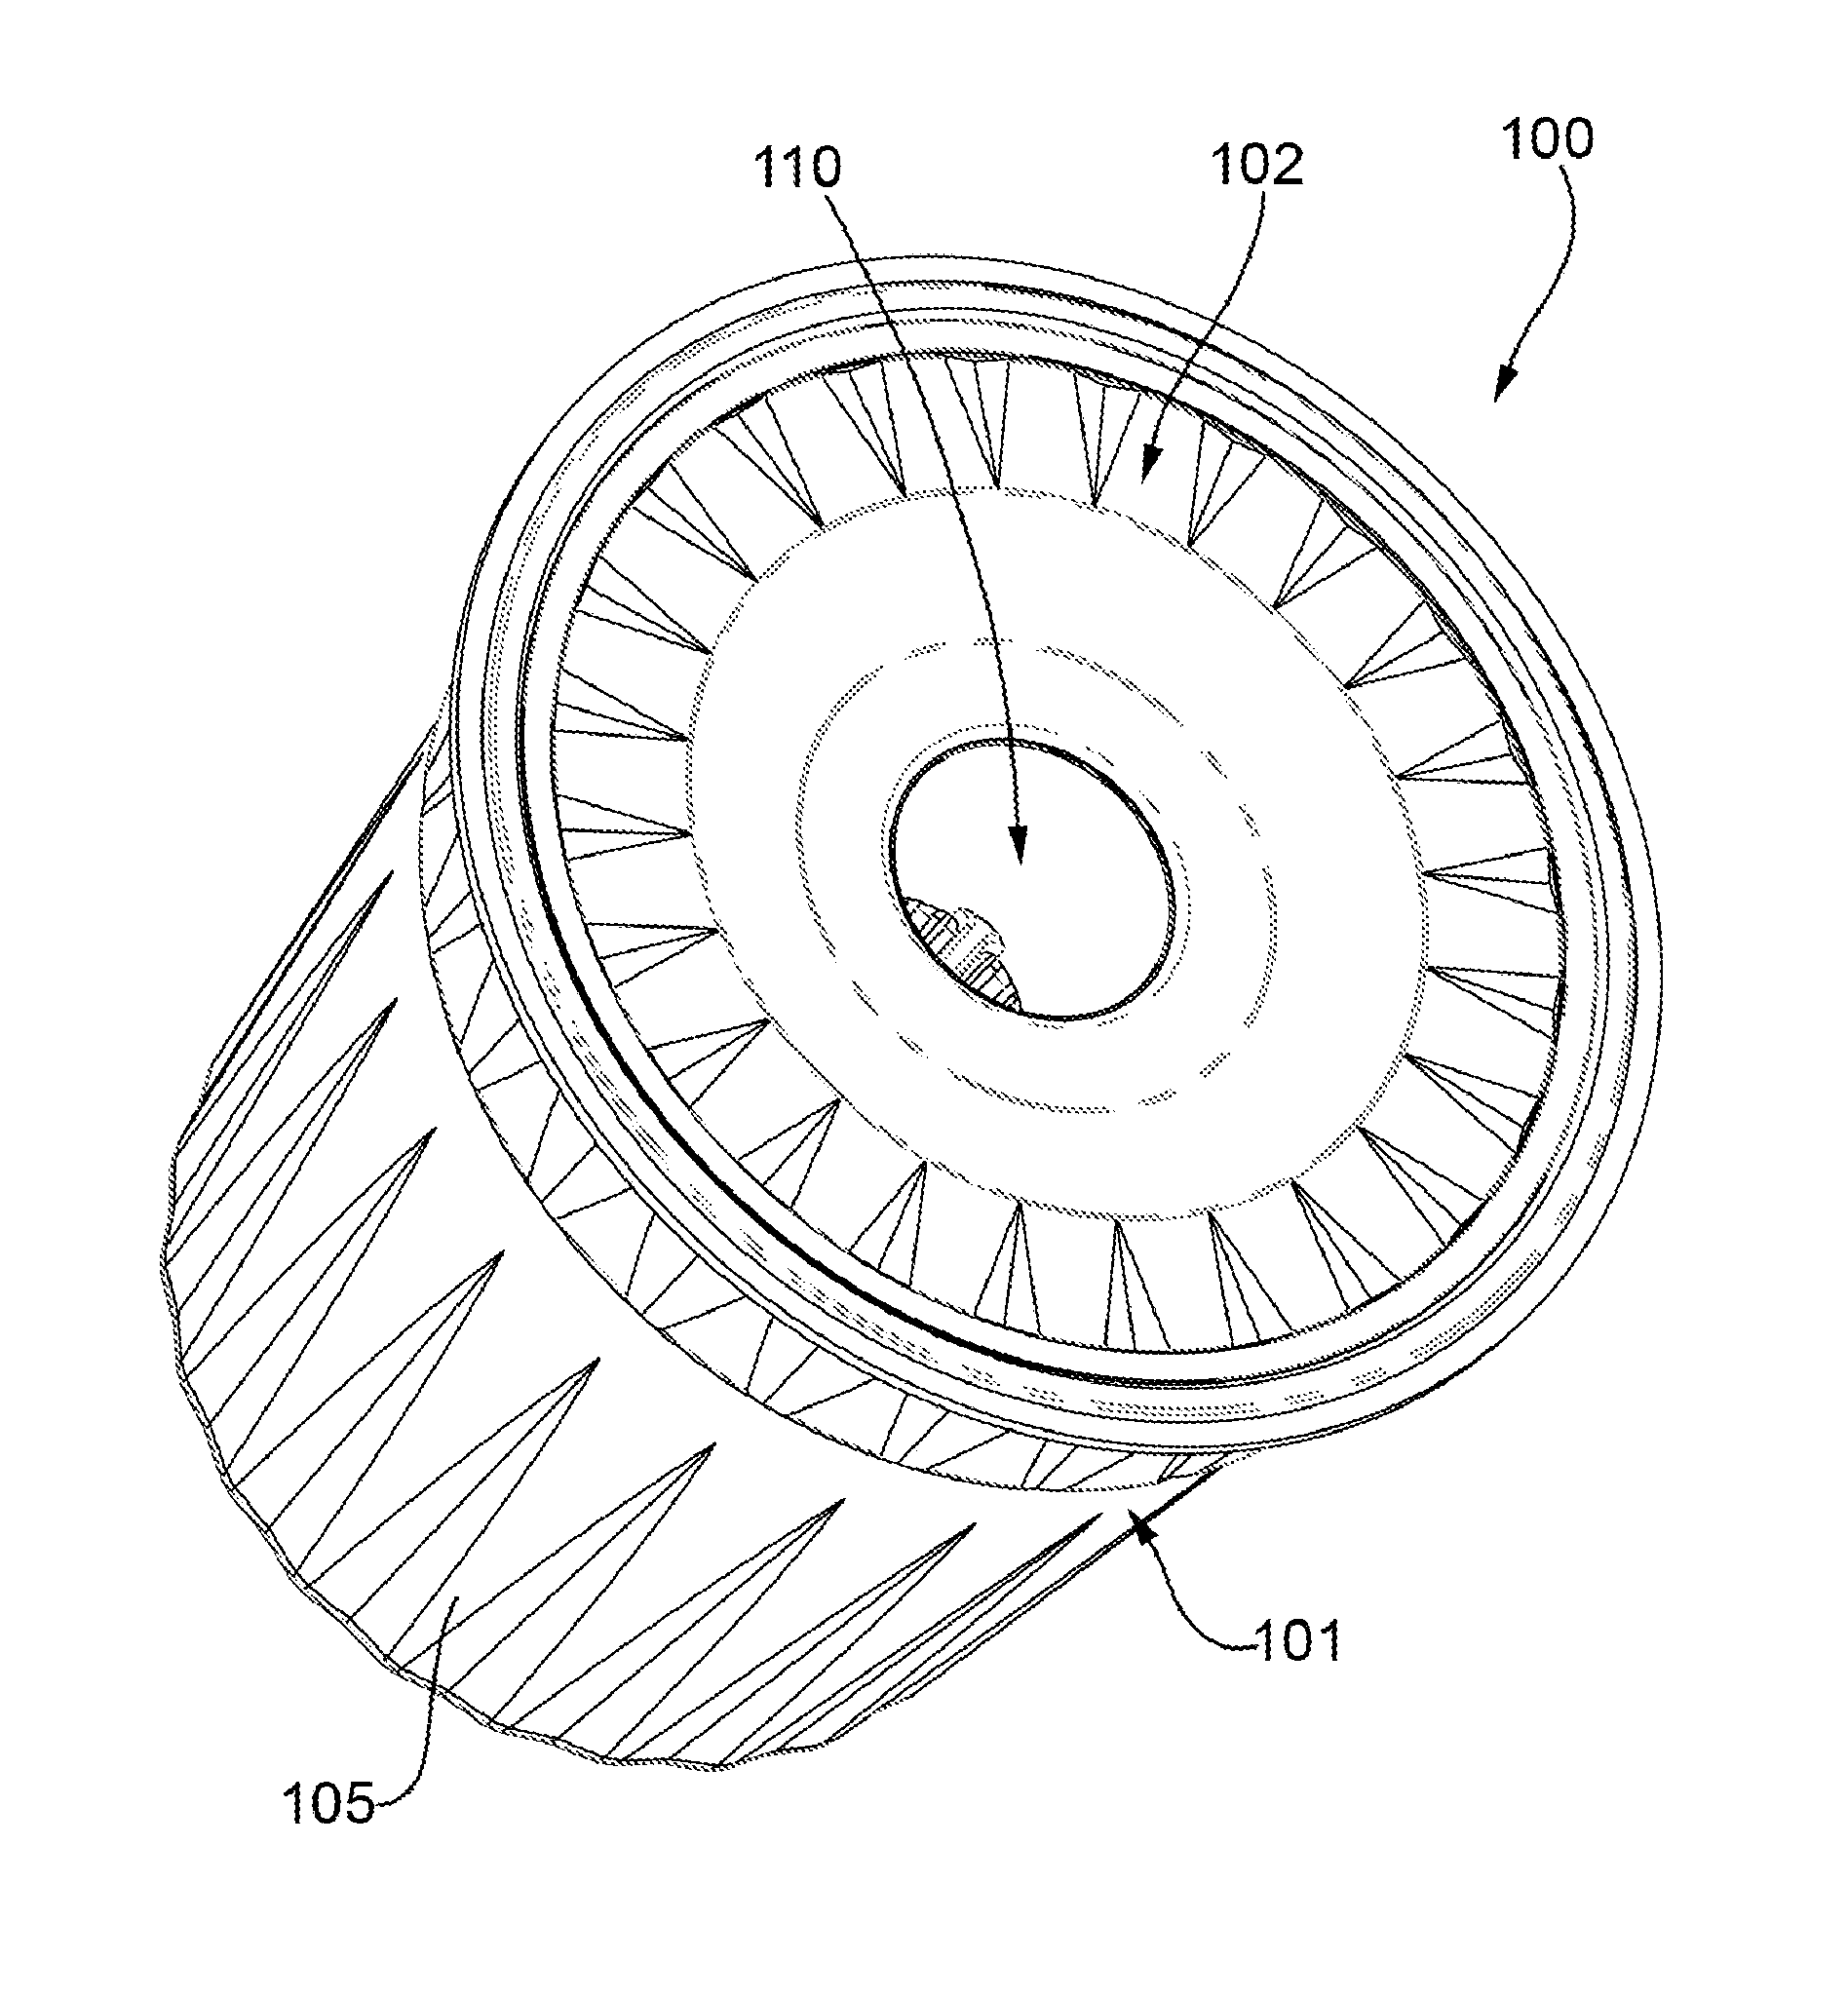 Interchangeable capsule for the preparation of an infusion of a powdered product, and relative method for obtaining such an infusion